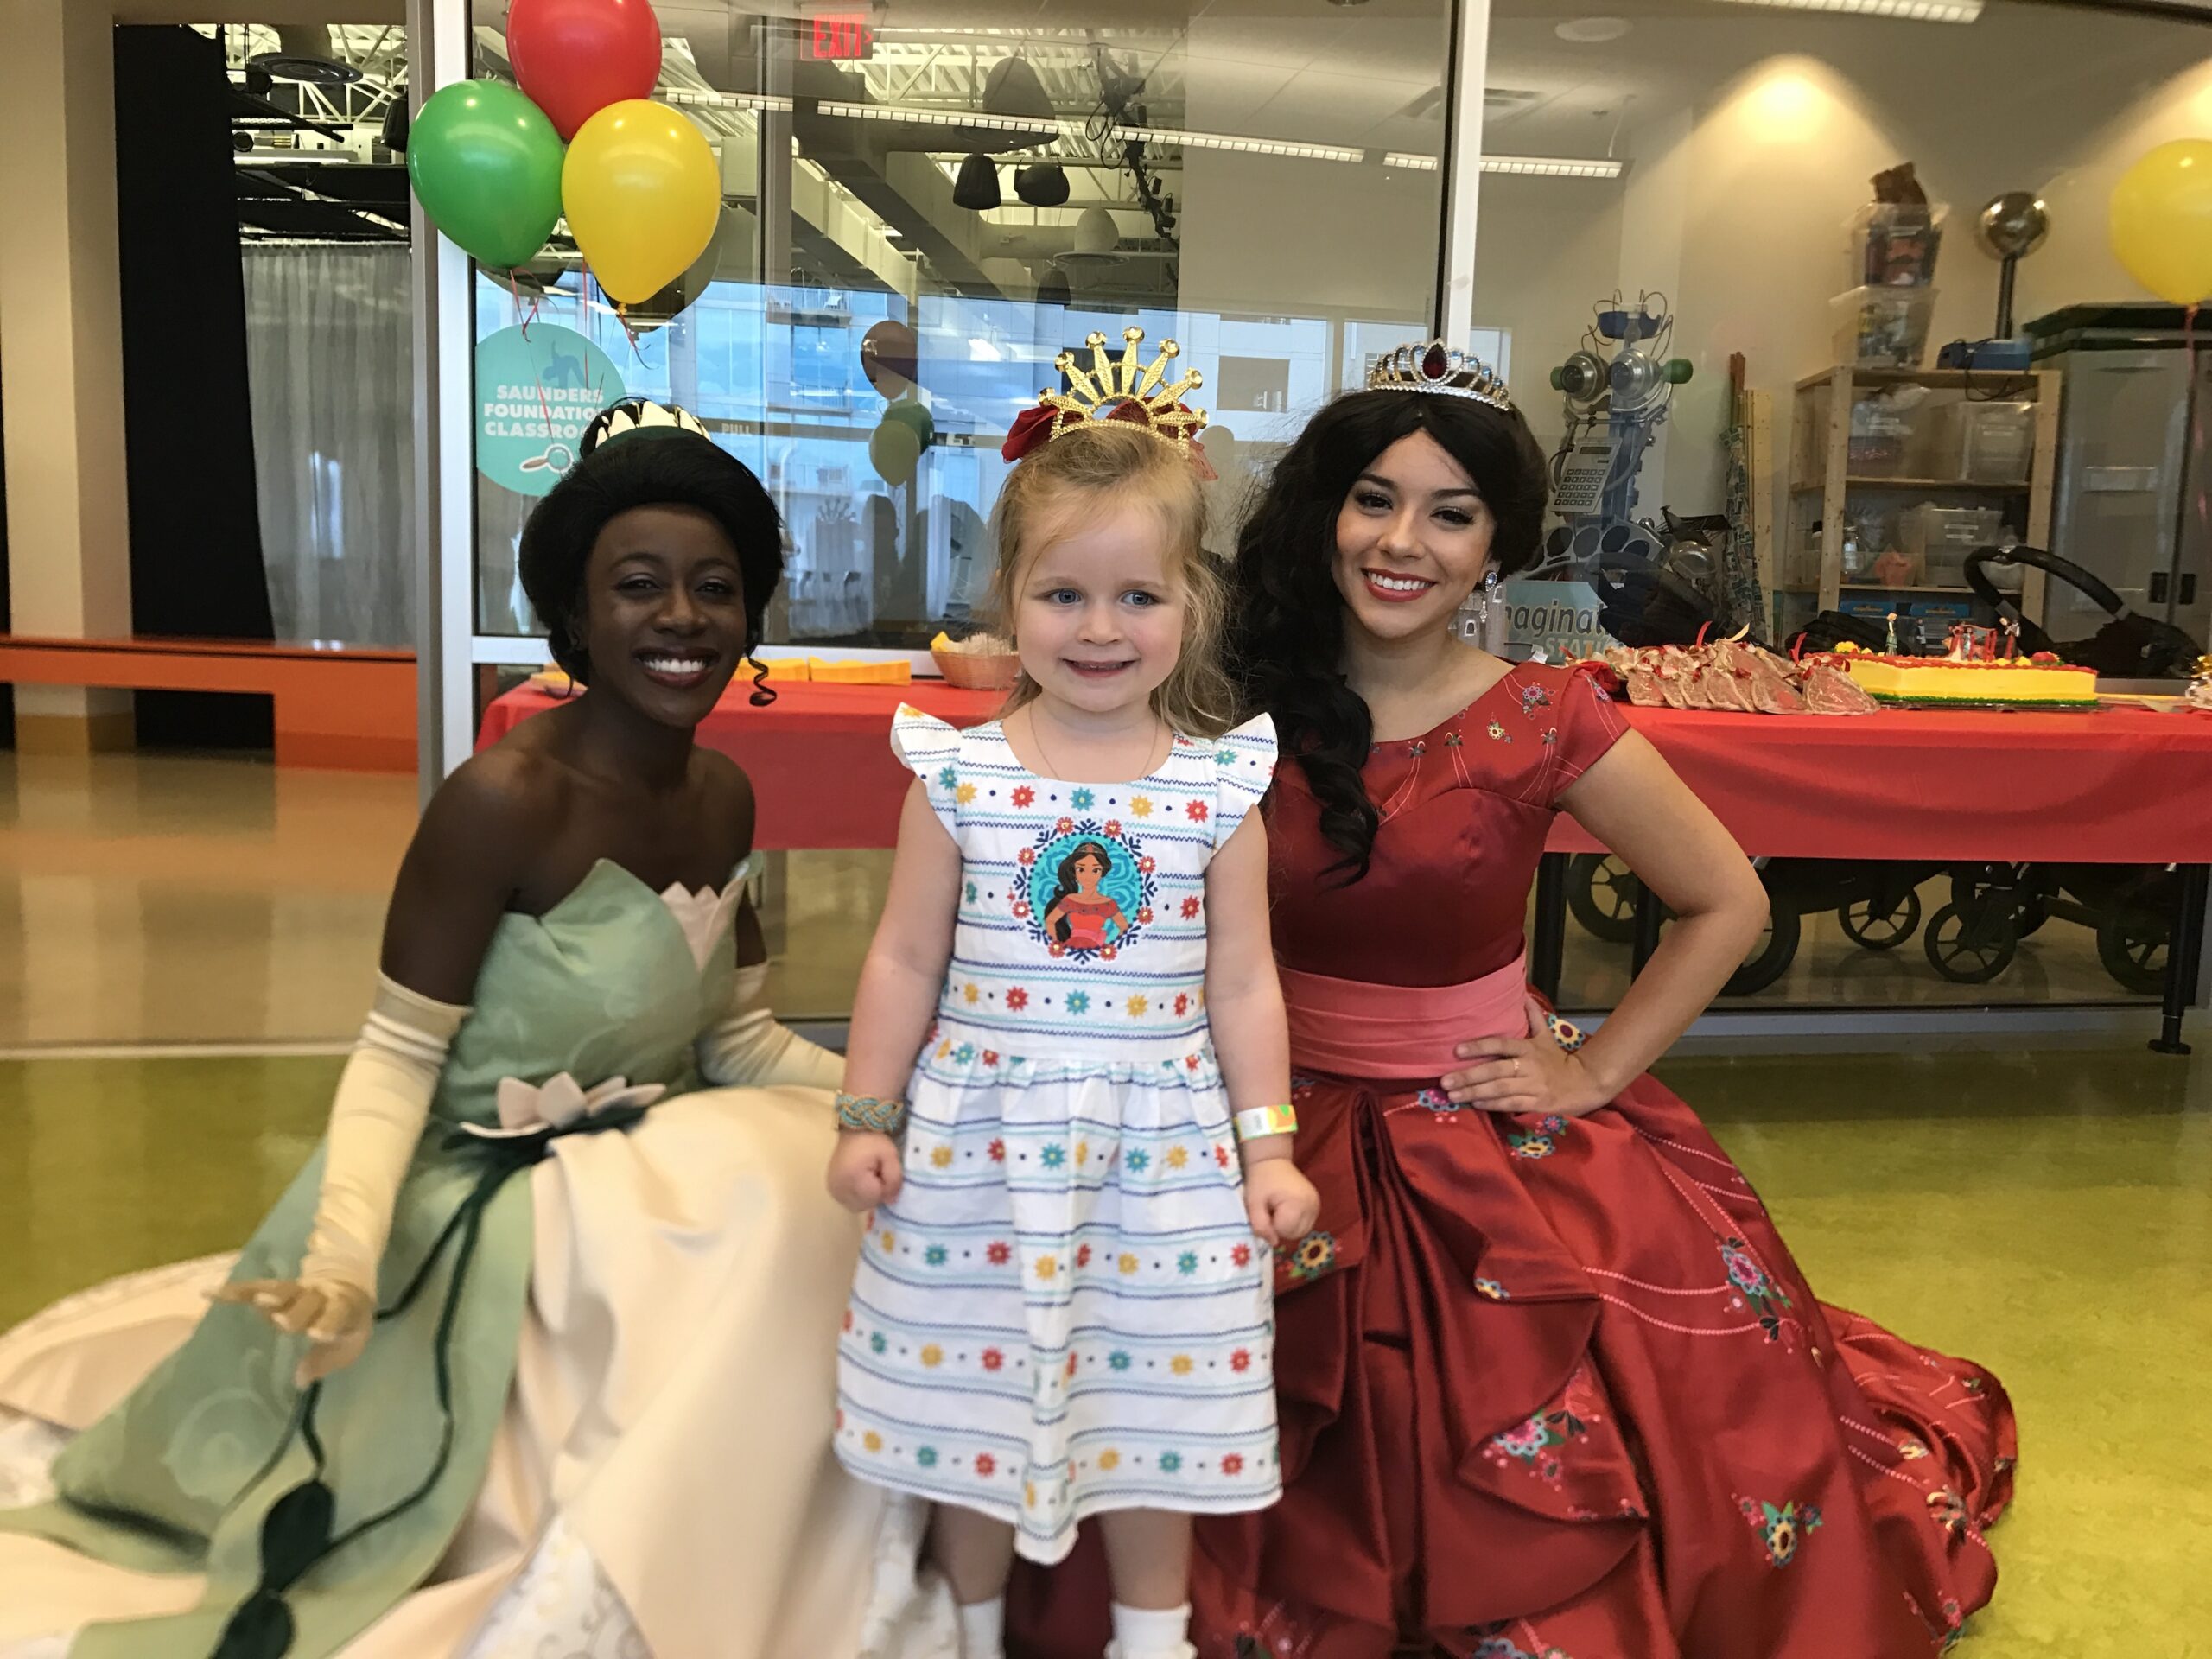 Tampa Birthday Party Venues | Parties with Character